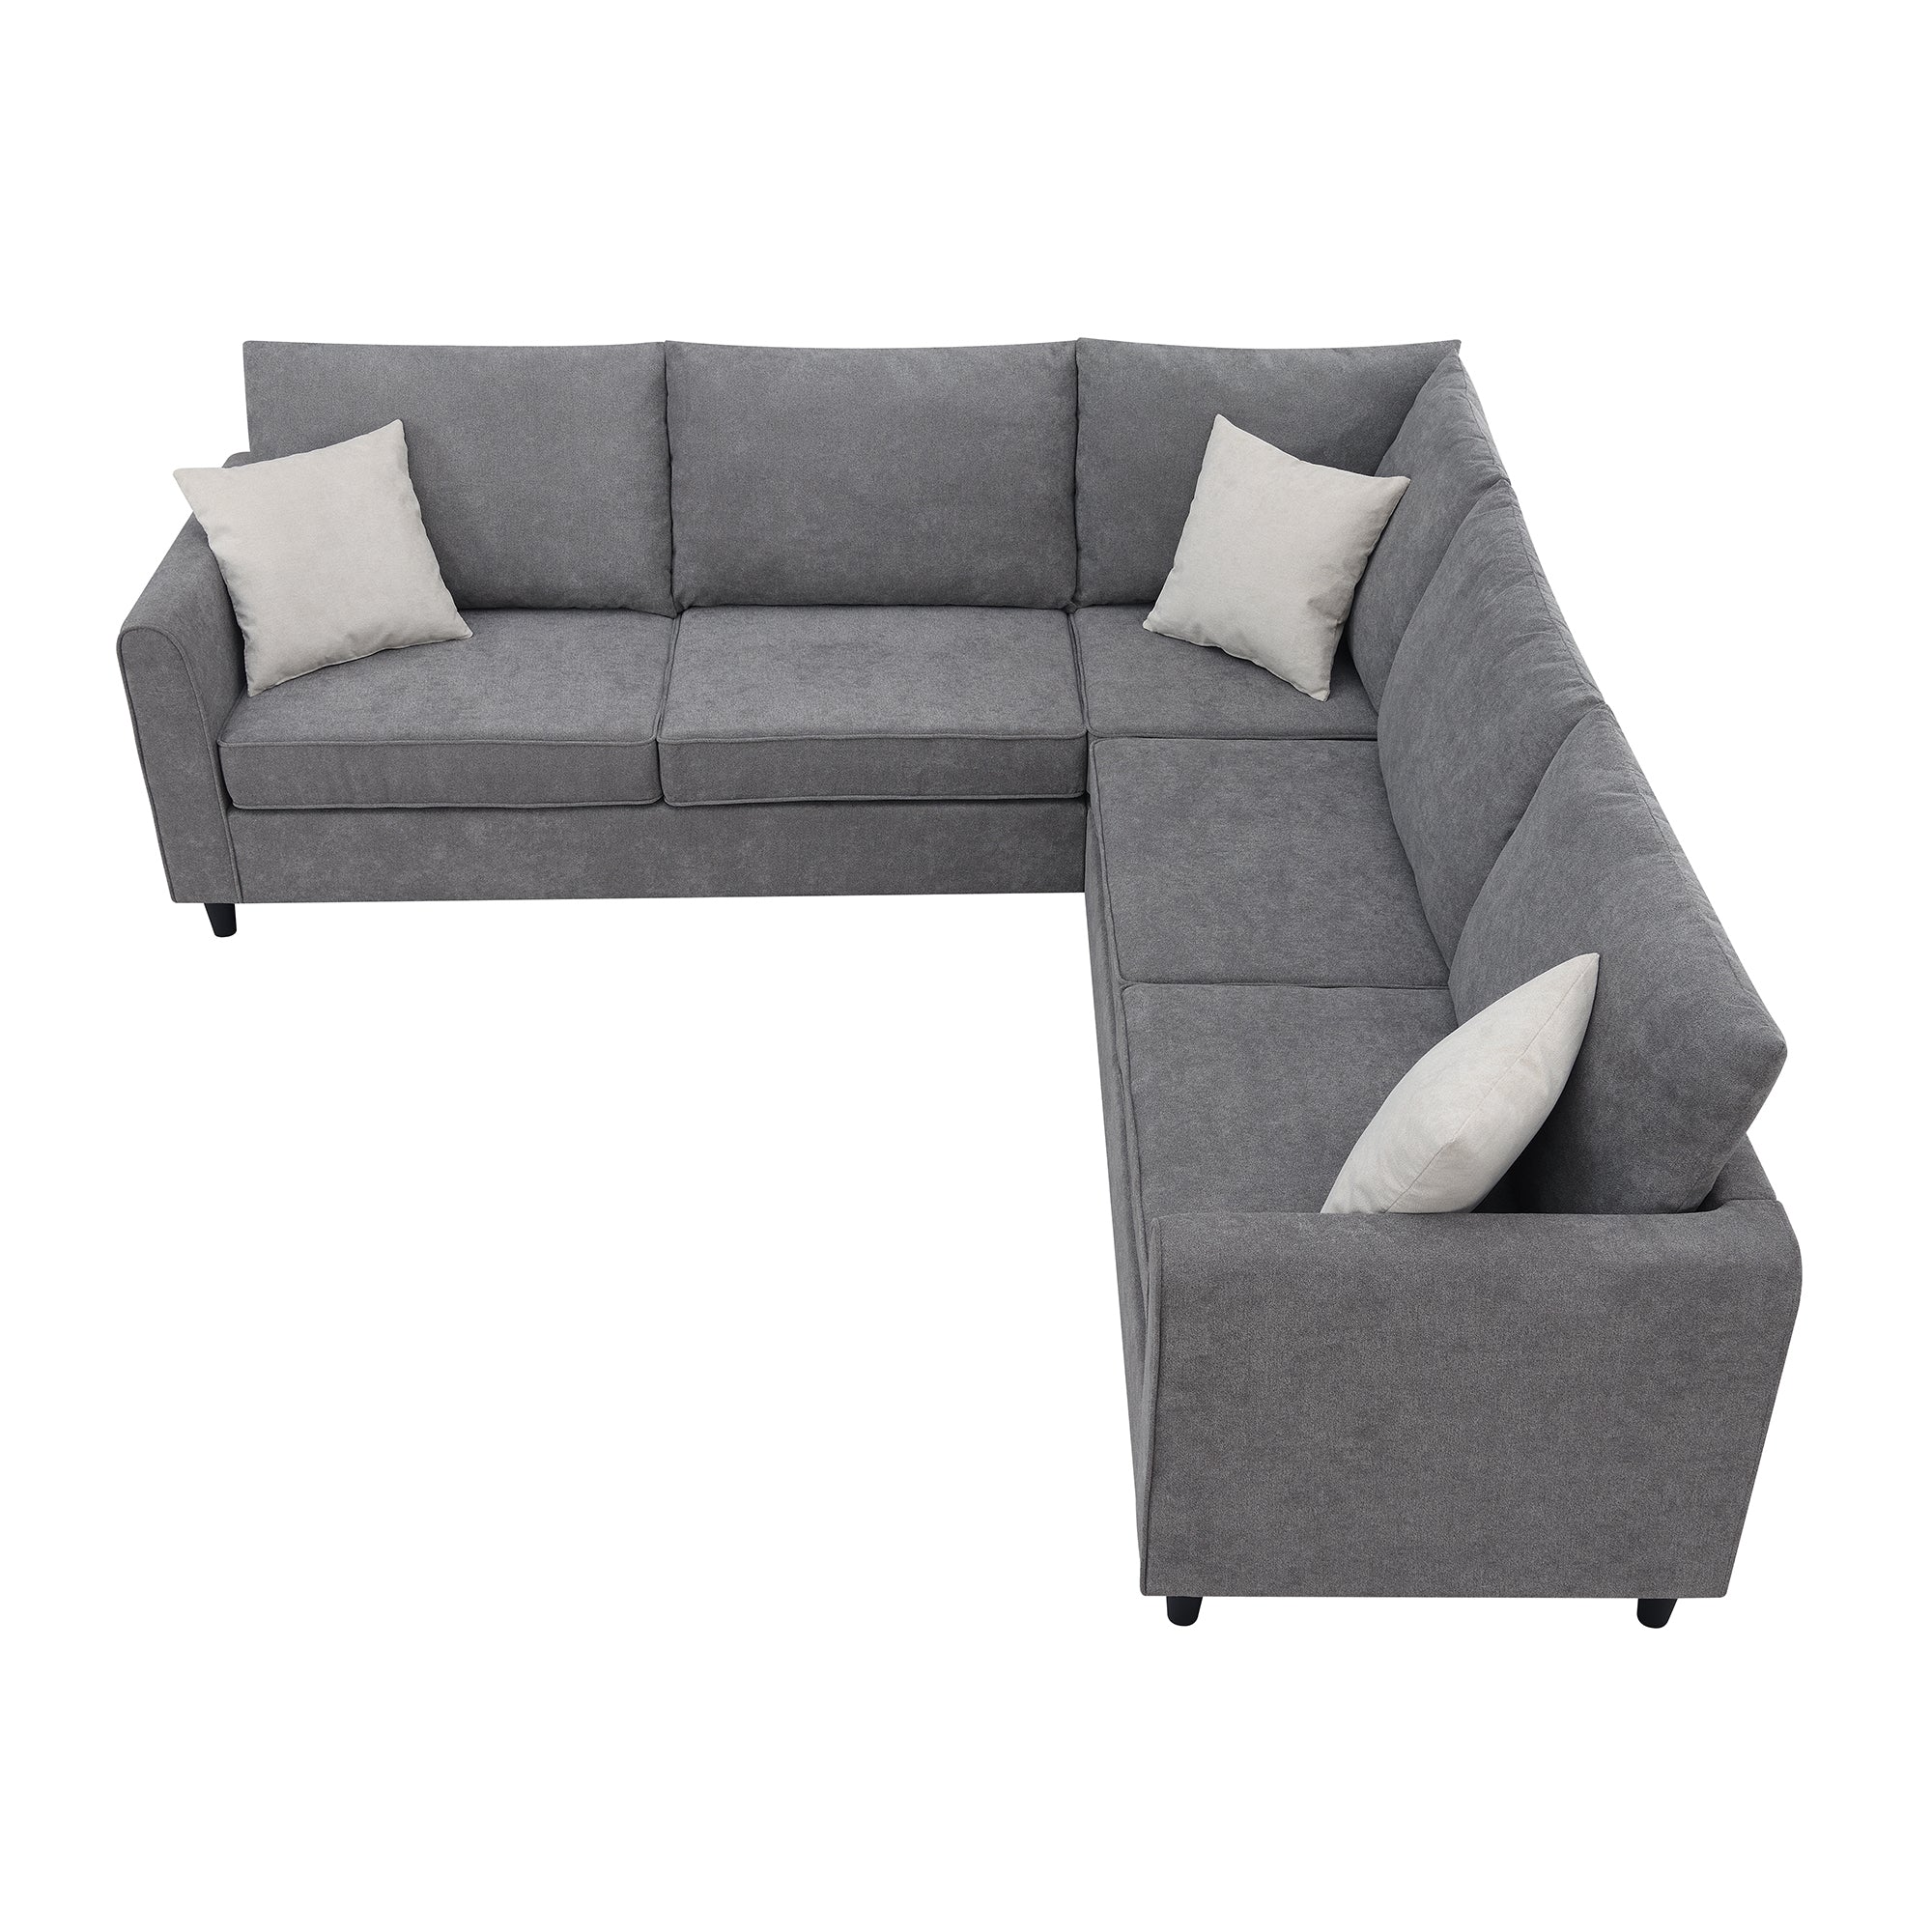 [VIDEO provided] [New] 91*91" Modern Upholstered Living Room Sectional Sofa, L Shape Furniture Couch with 3 Pillows